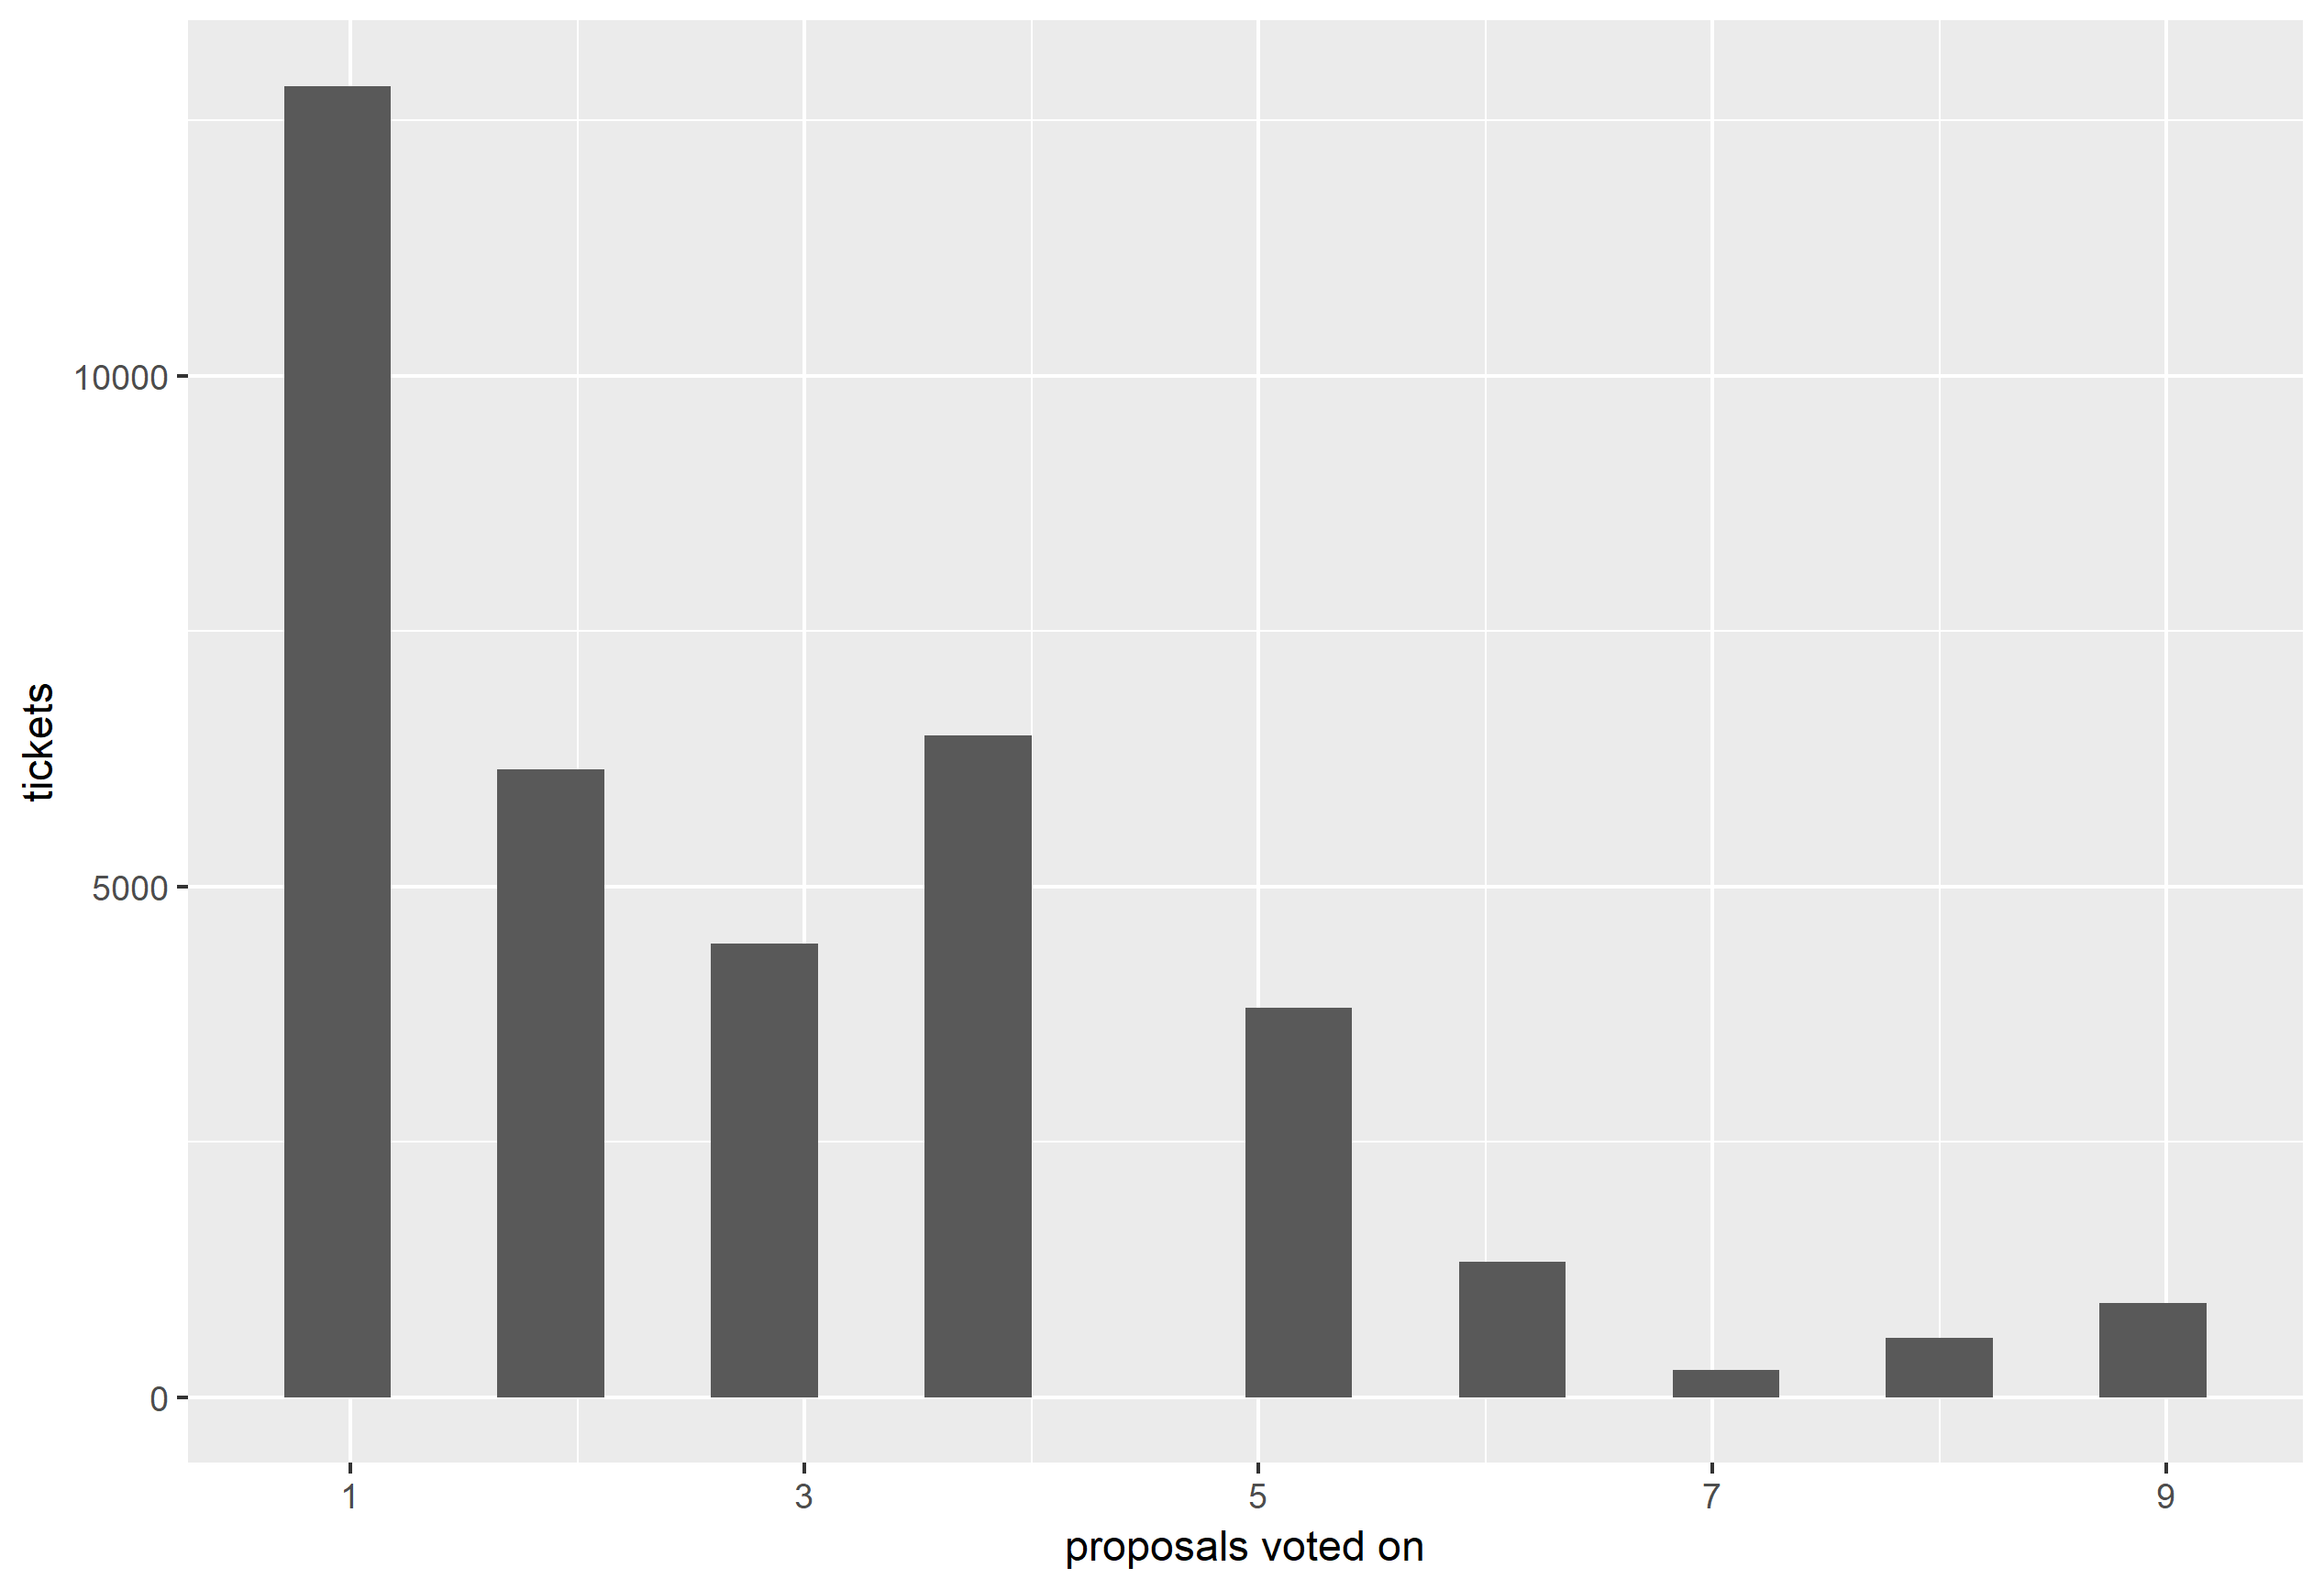 Number of proposals voted on by each ticket